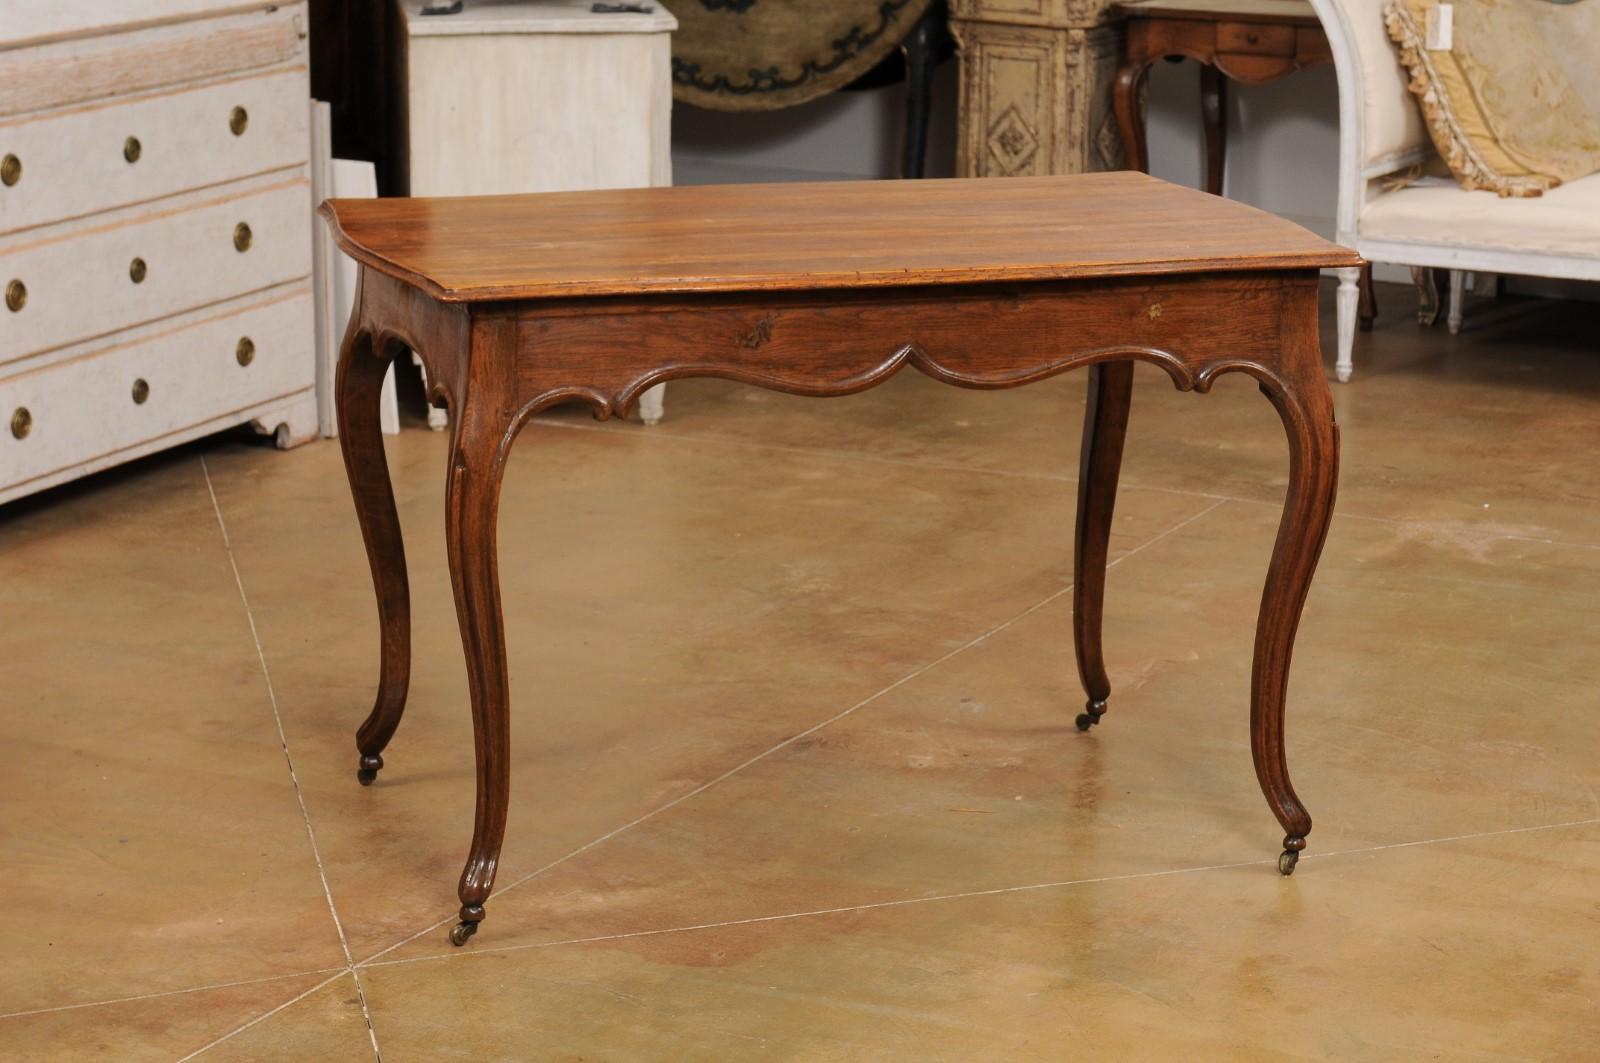 Italian Rococo Early 19th Century Oak Table with Carved Apron and Cabriole Legs In Good Condition For Sale In Atlanta, GA